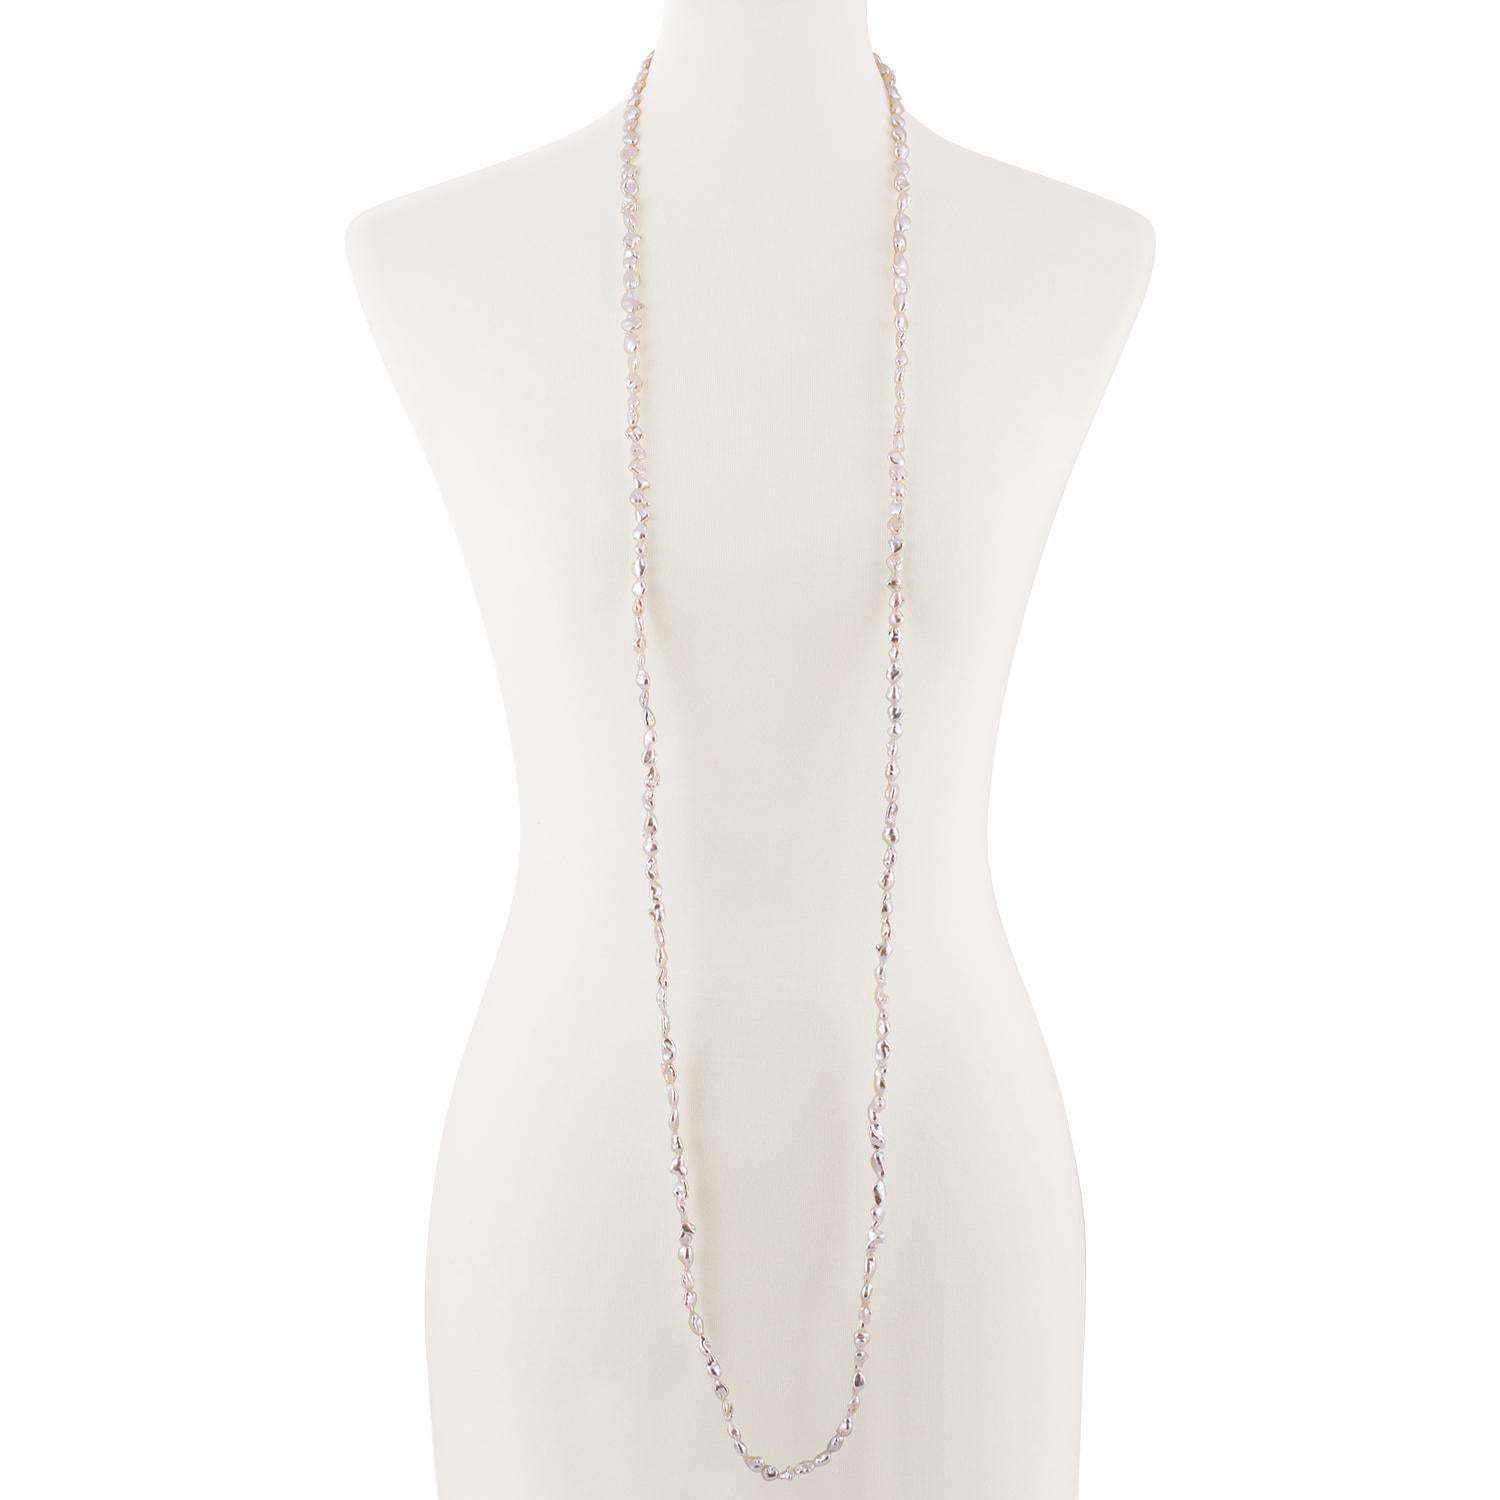 This pearl rope necklace features South Sea white keshi cultured pearls strung with knots to 61 inches in length. The pearls measure 6x8mm and there are 160 pearls total. This necklace can worn many different ways by doubling, tripling or even